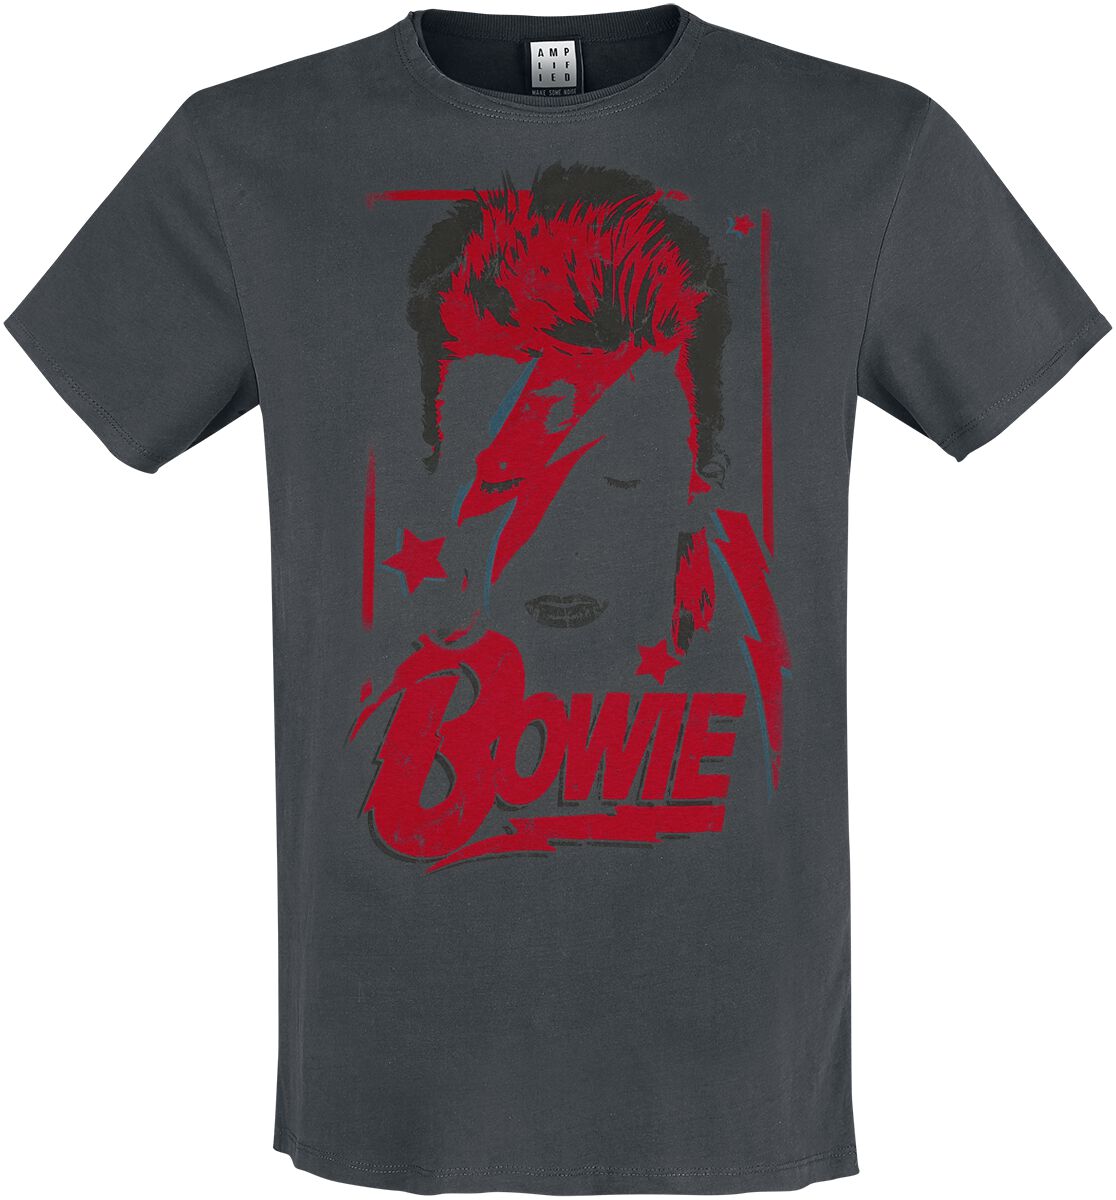 David Bowie Amplified Collection - Aladdin Sane T-Shirt charcoal